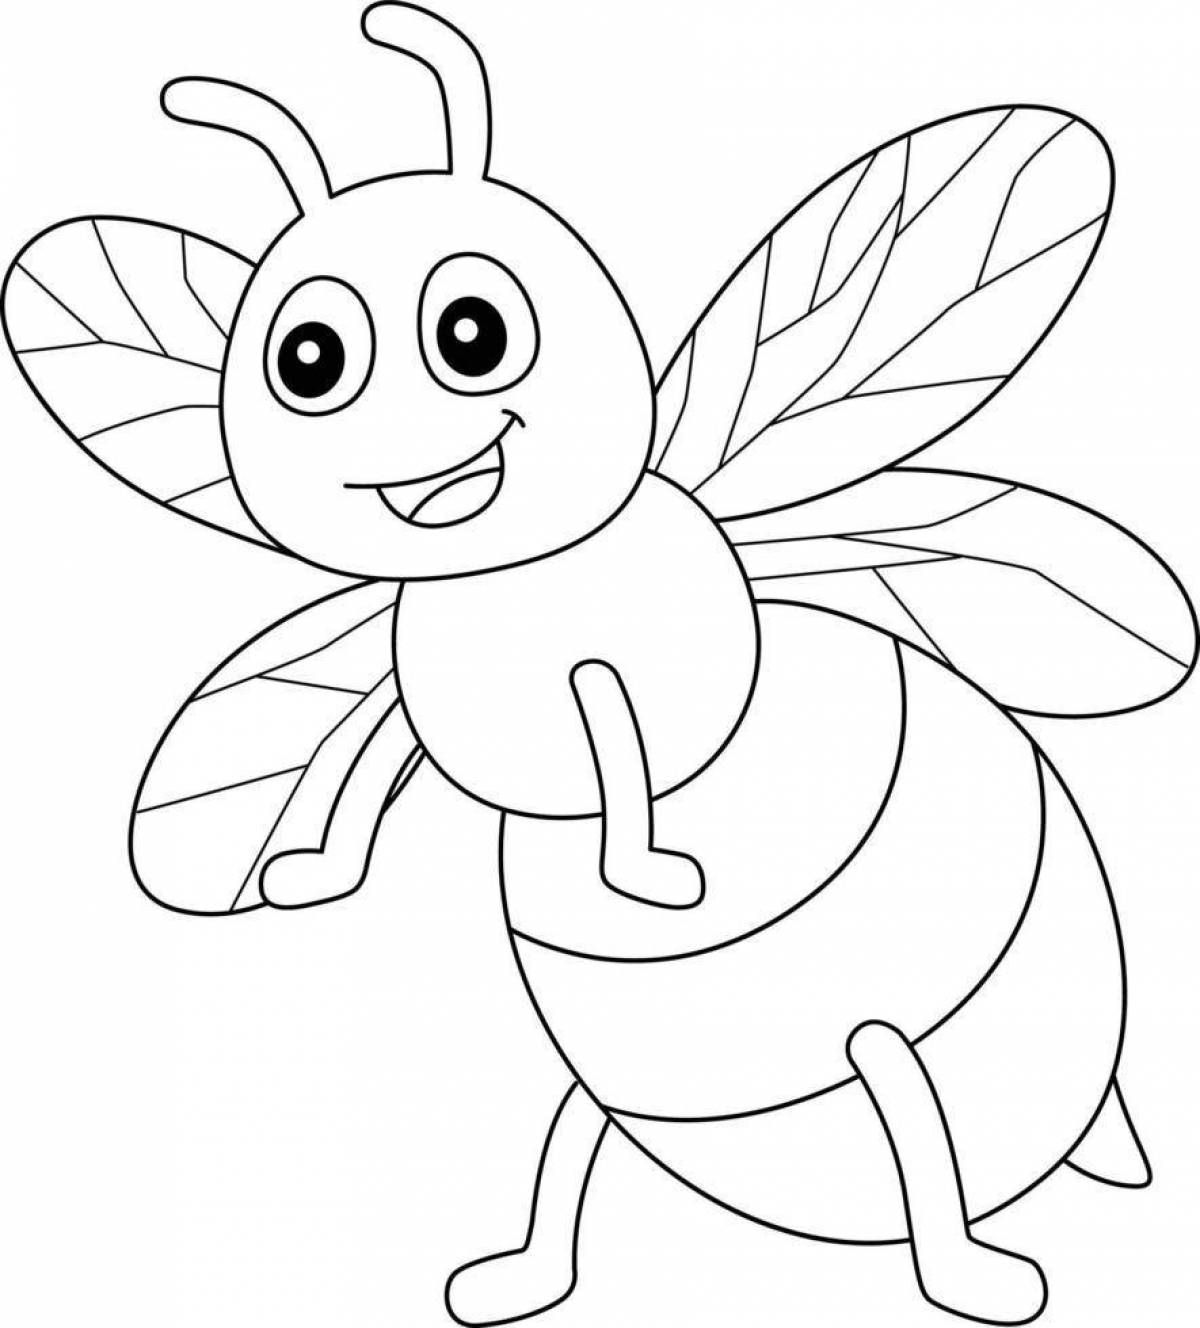 Coloring book funny bee for children 3-4 years old